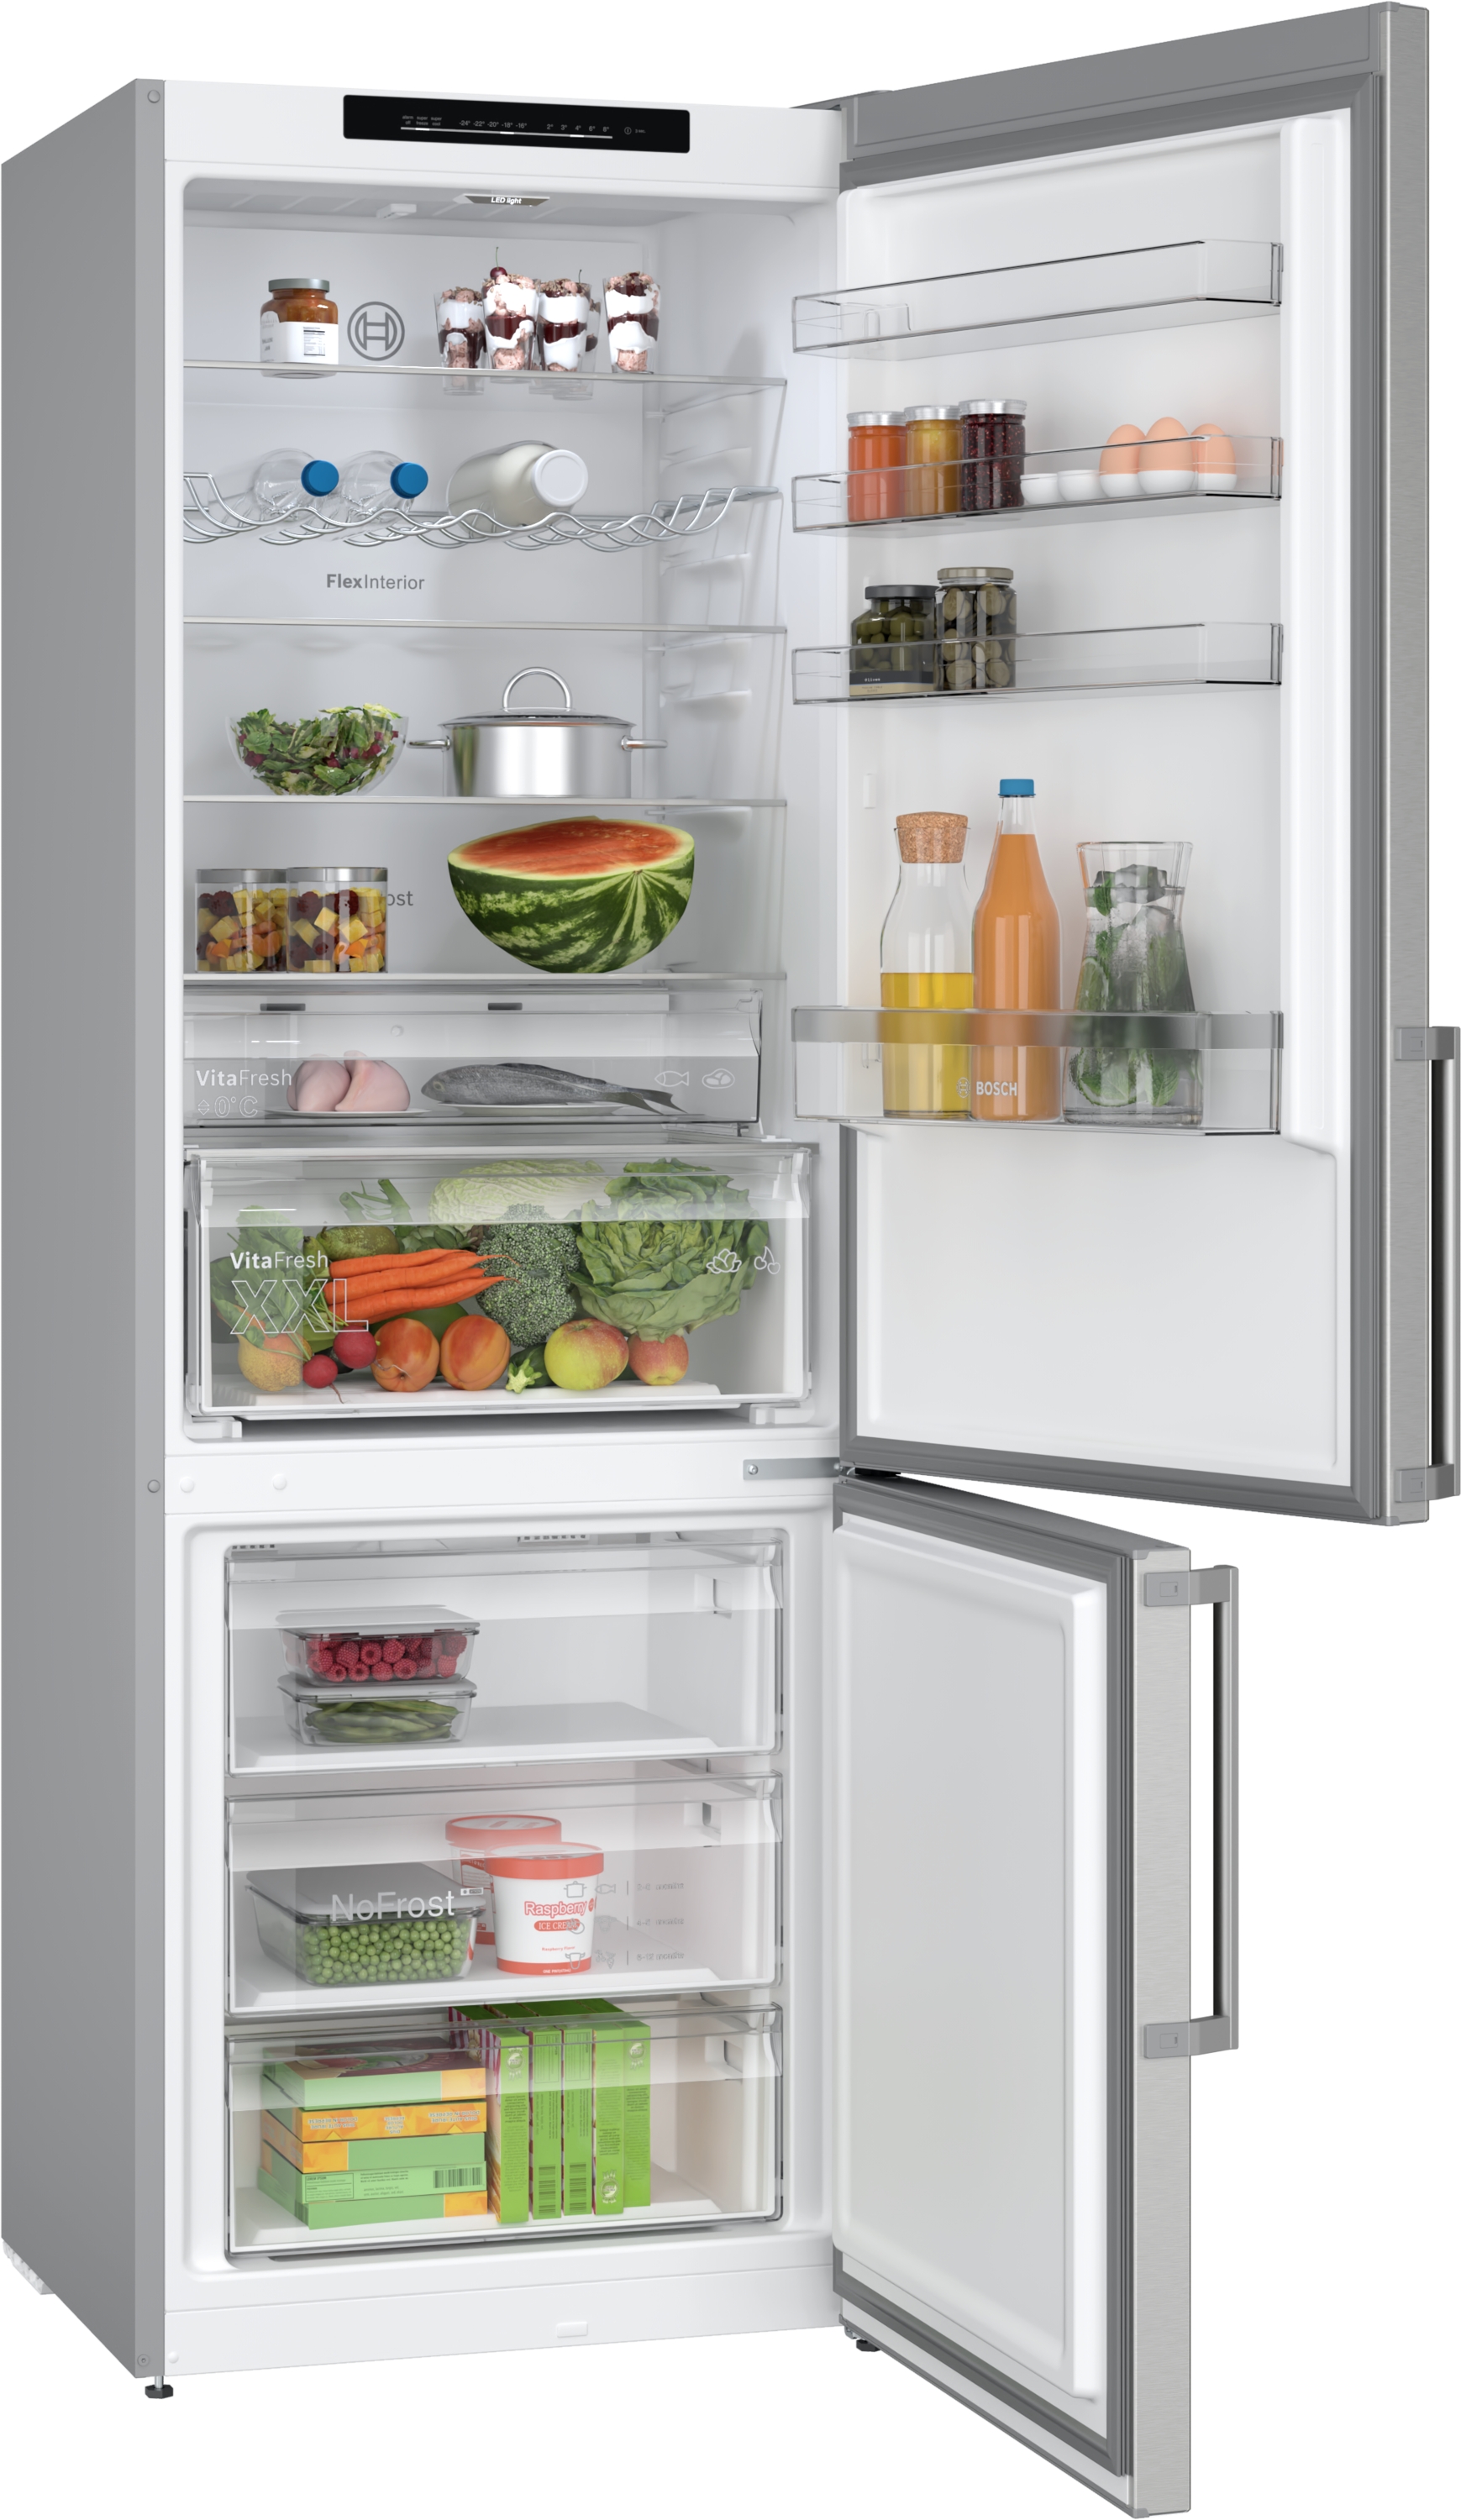 Series 4, free-standing fridge-freezer with freezer at bottom, 203 x 70 cm, Stainless steel (with anti-fingerprint), KGN49VICT